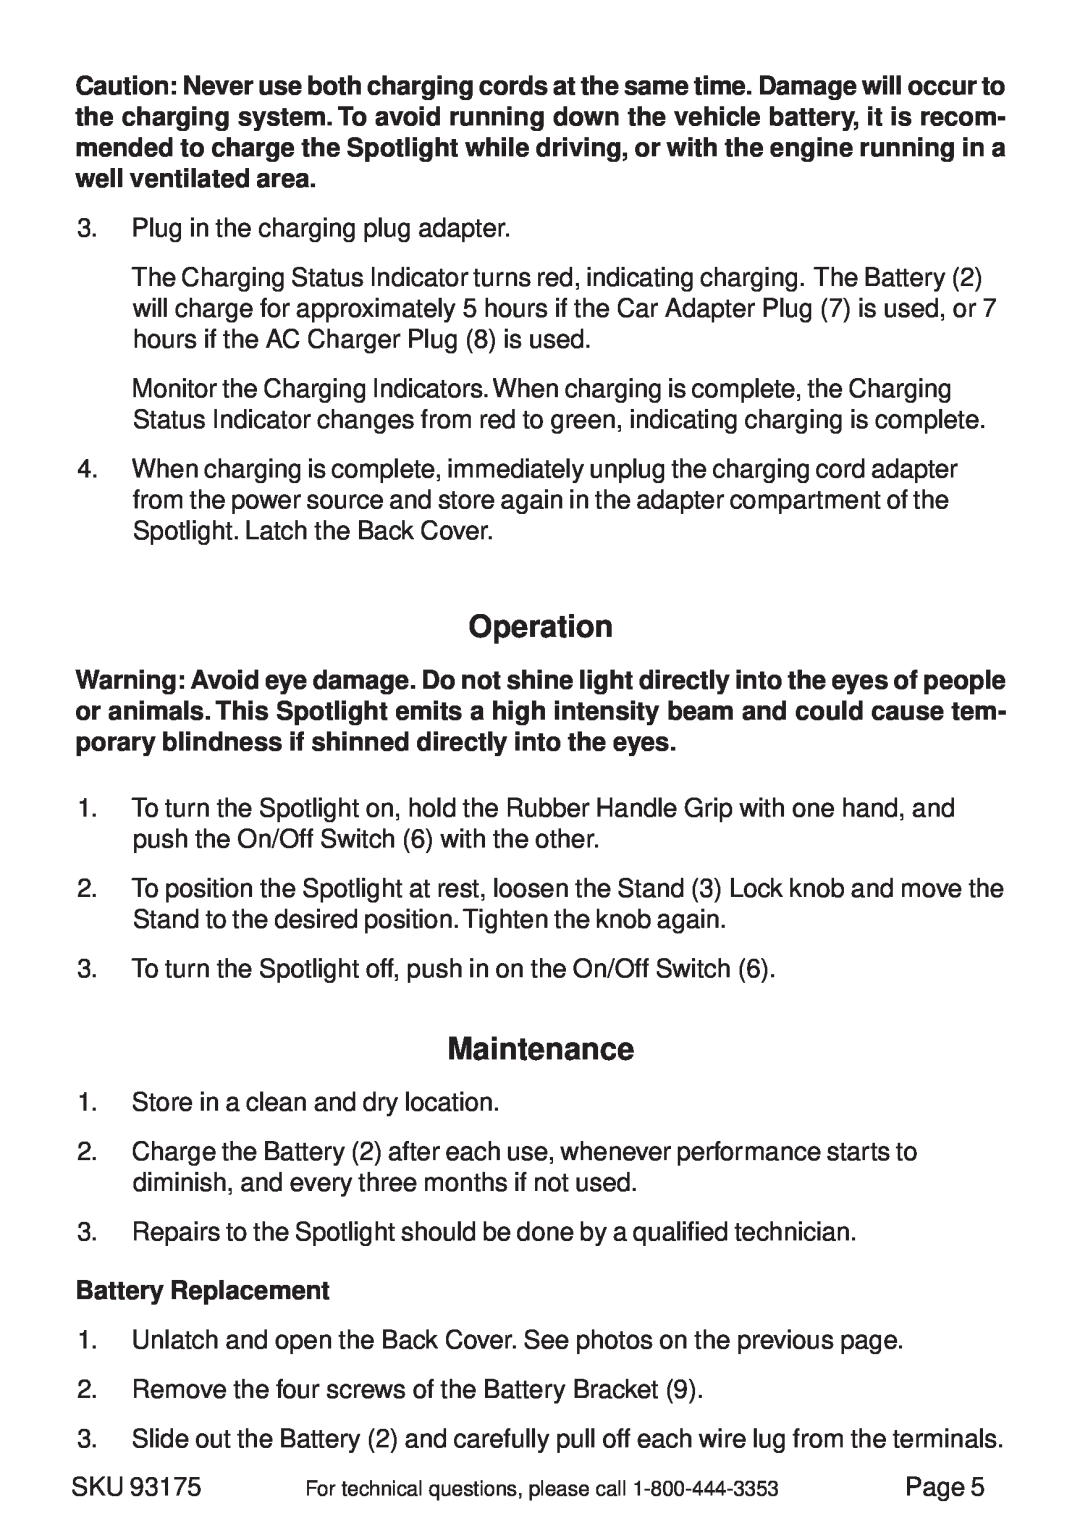 Chicago Electric 93175 operating instructions Operation, Maintenance, Battery Replacement 